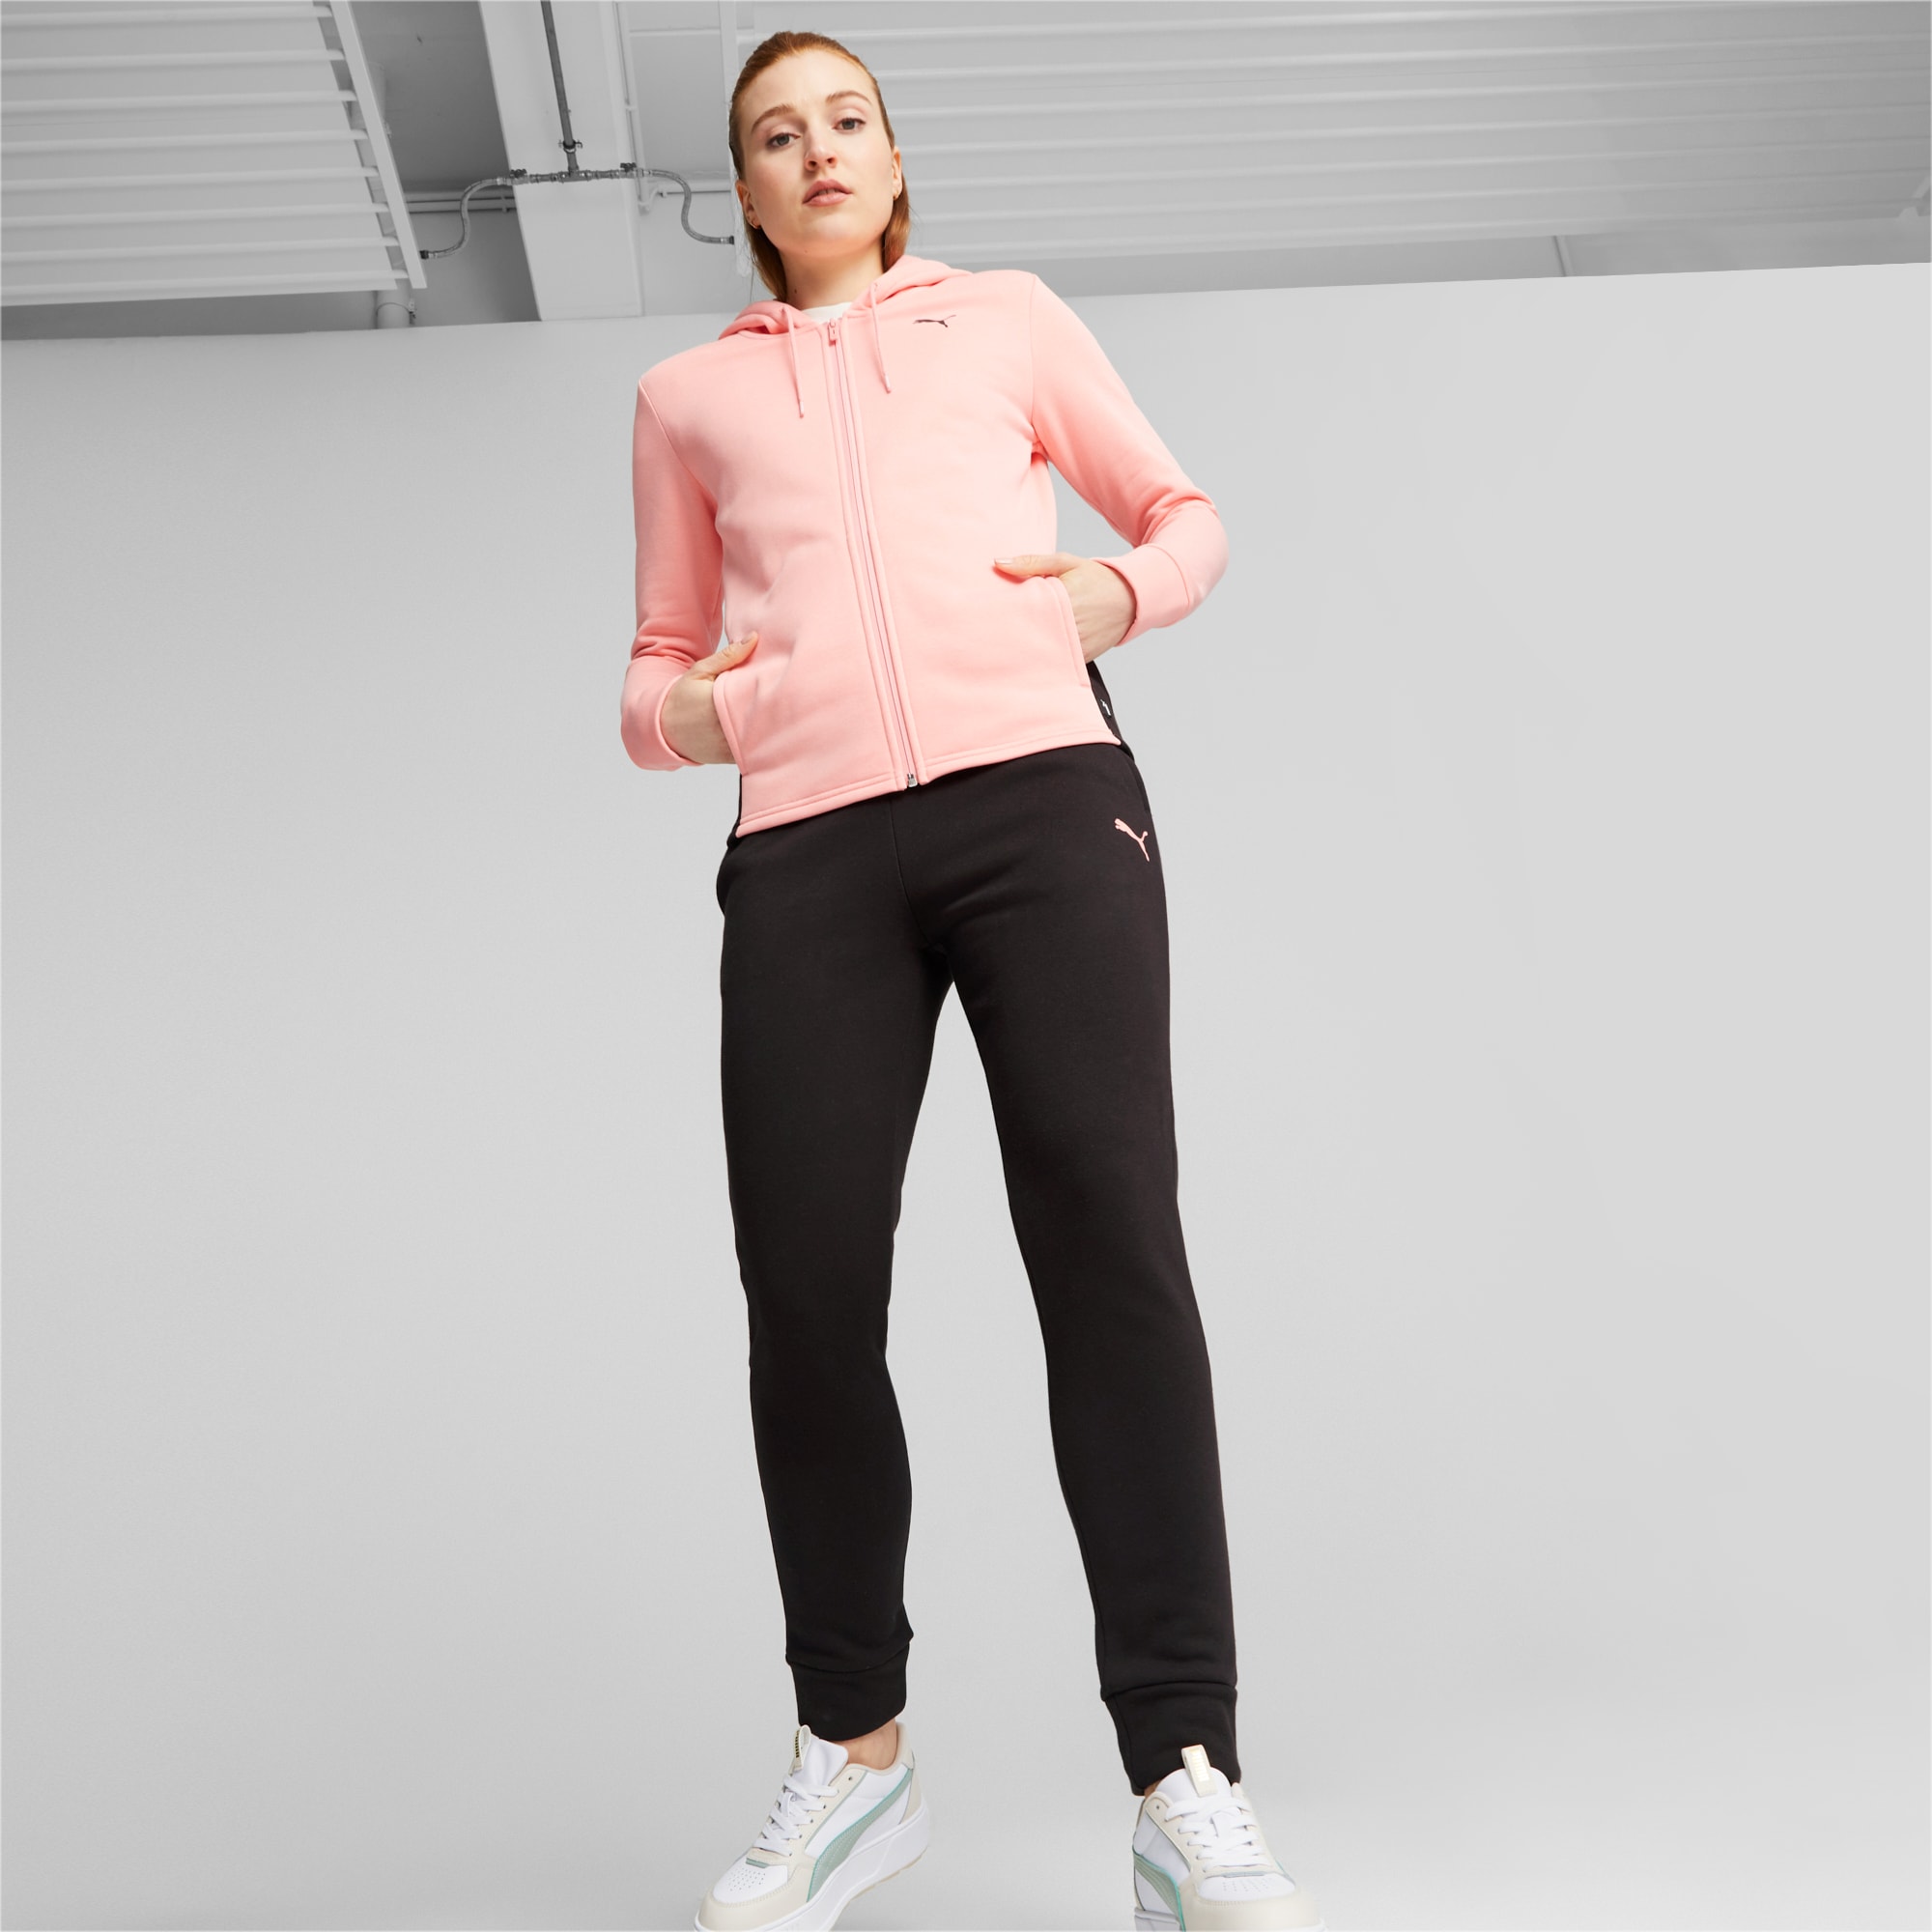 PUMA Classics Hooded Fl Tracksuit Women, Peach Smoothie, Size M, Clothing